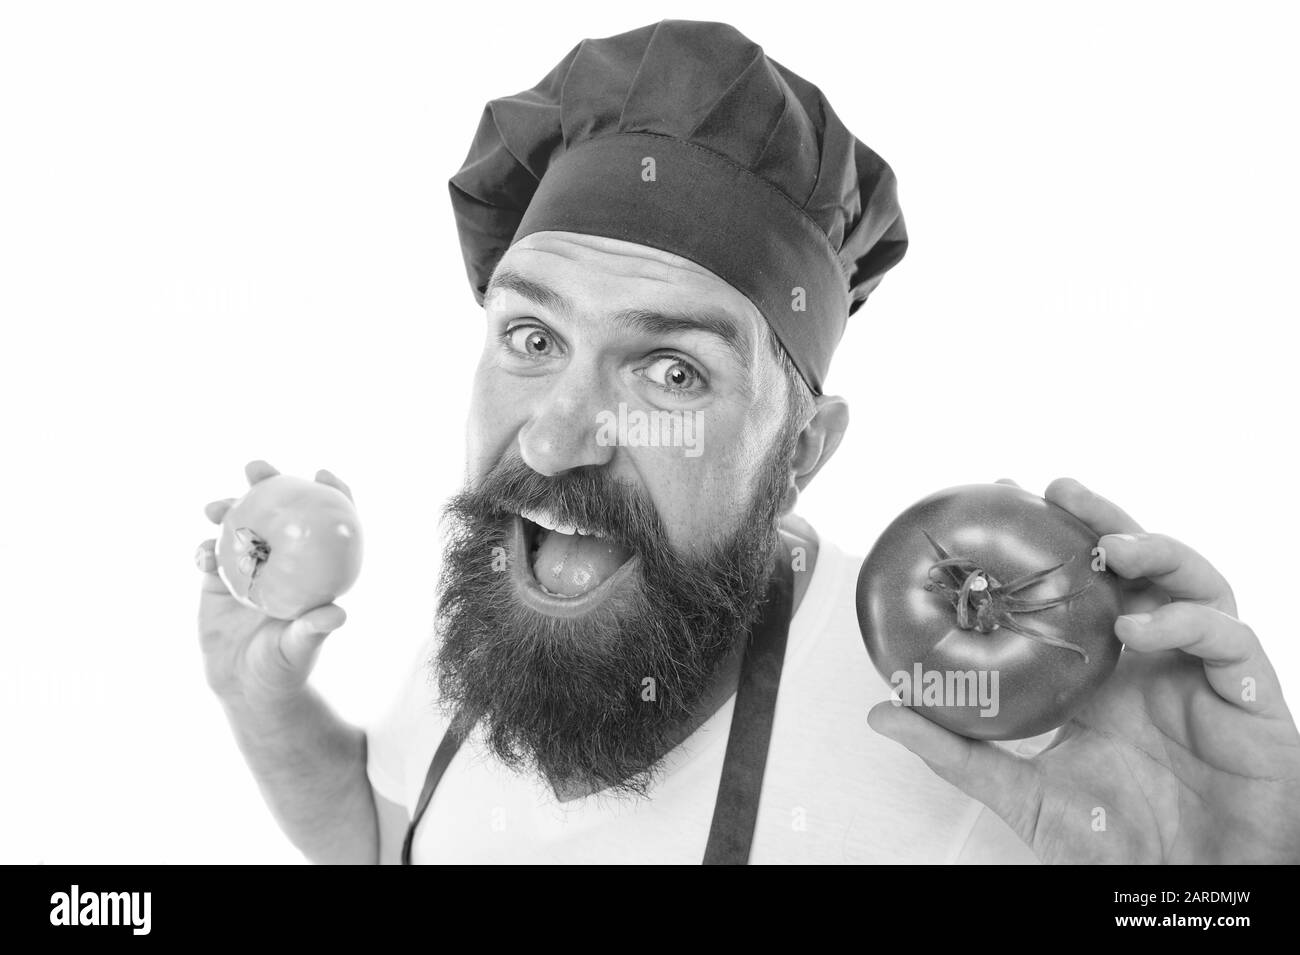 Cook in uniform holds vegetables. Ripe tomato for delicious meal. Eat fresh tomato. Pick one. Tomato sauce recipe. Healthy cooking concept. Man with beard on white background. Chef holds tomatoes. Stock Photo